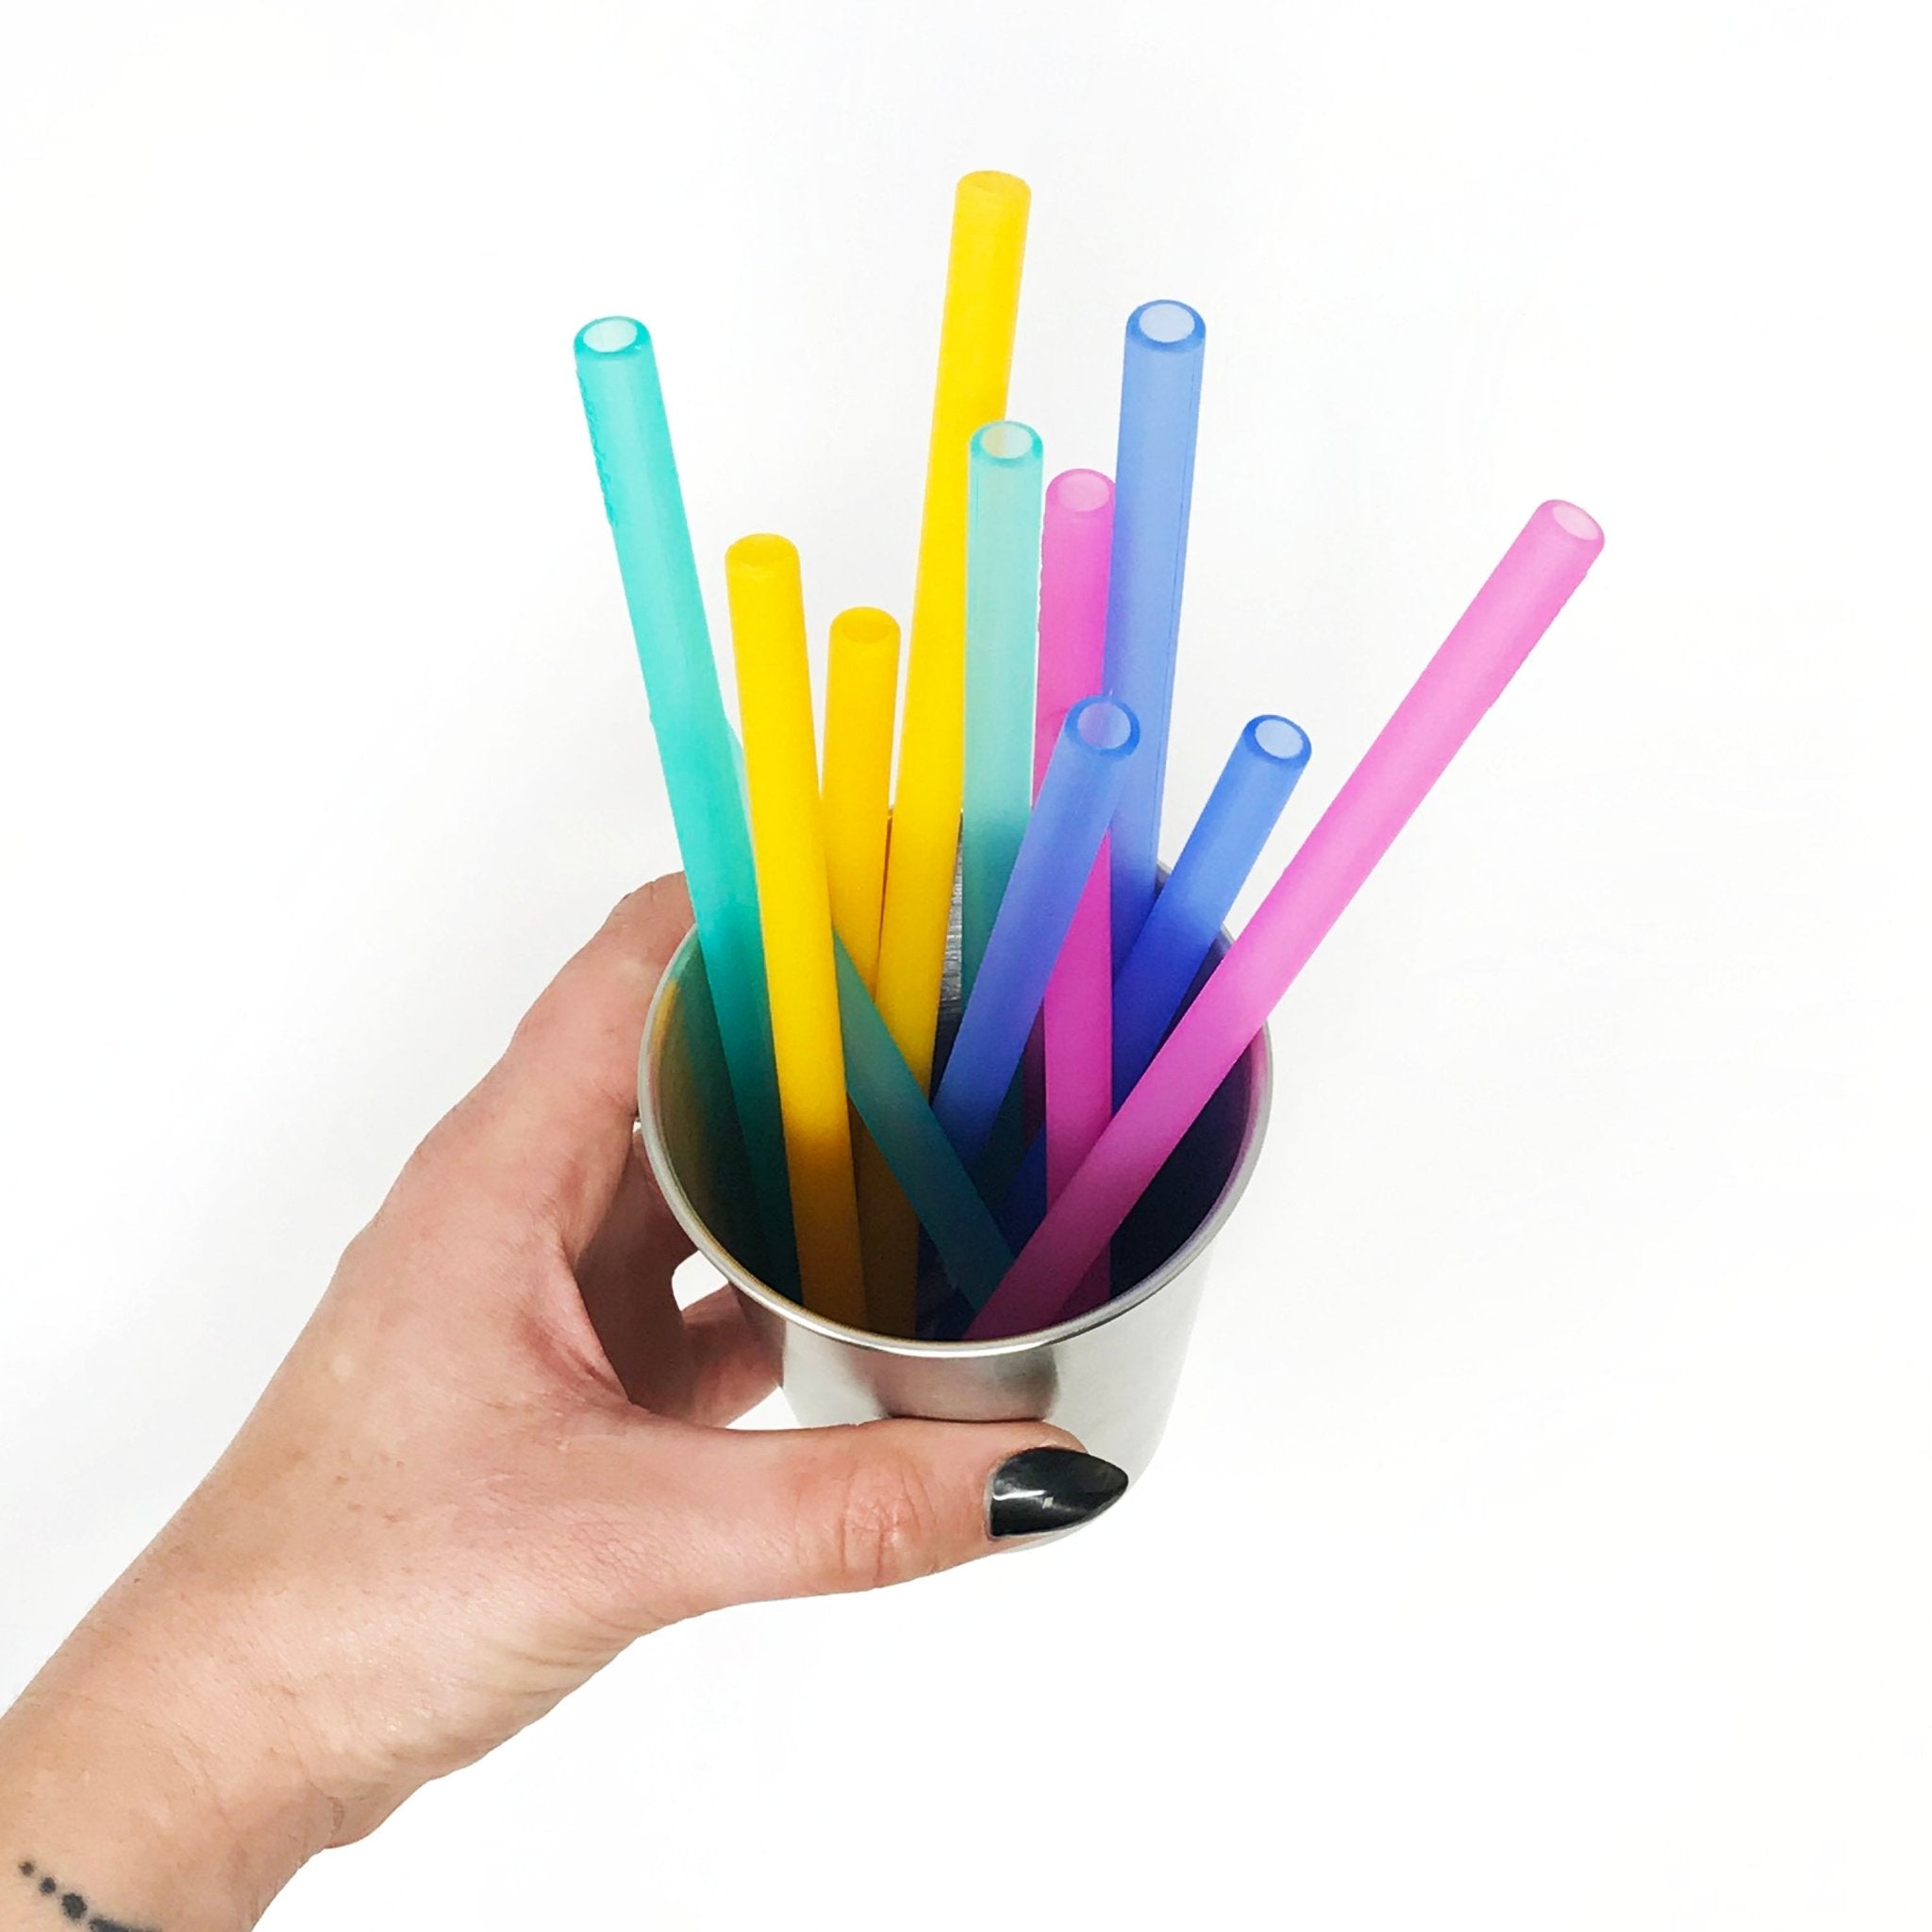 Reusable Straws/ Red Hear and Stripes Reusable Straws / 